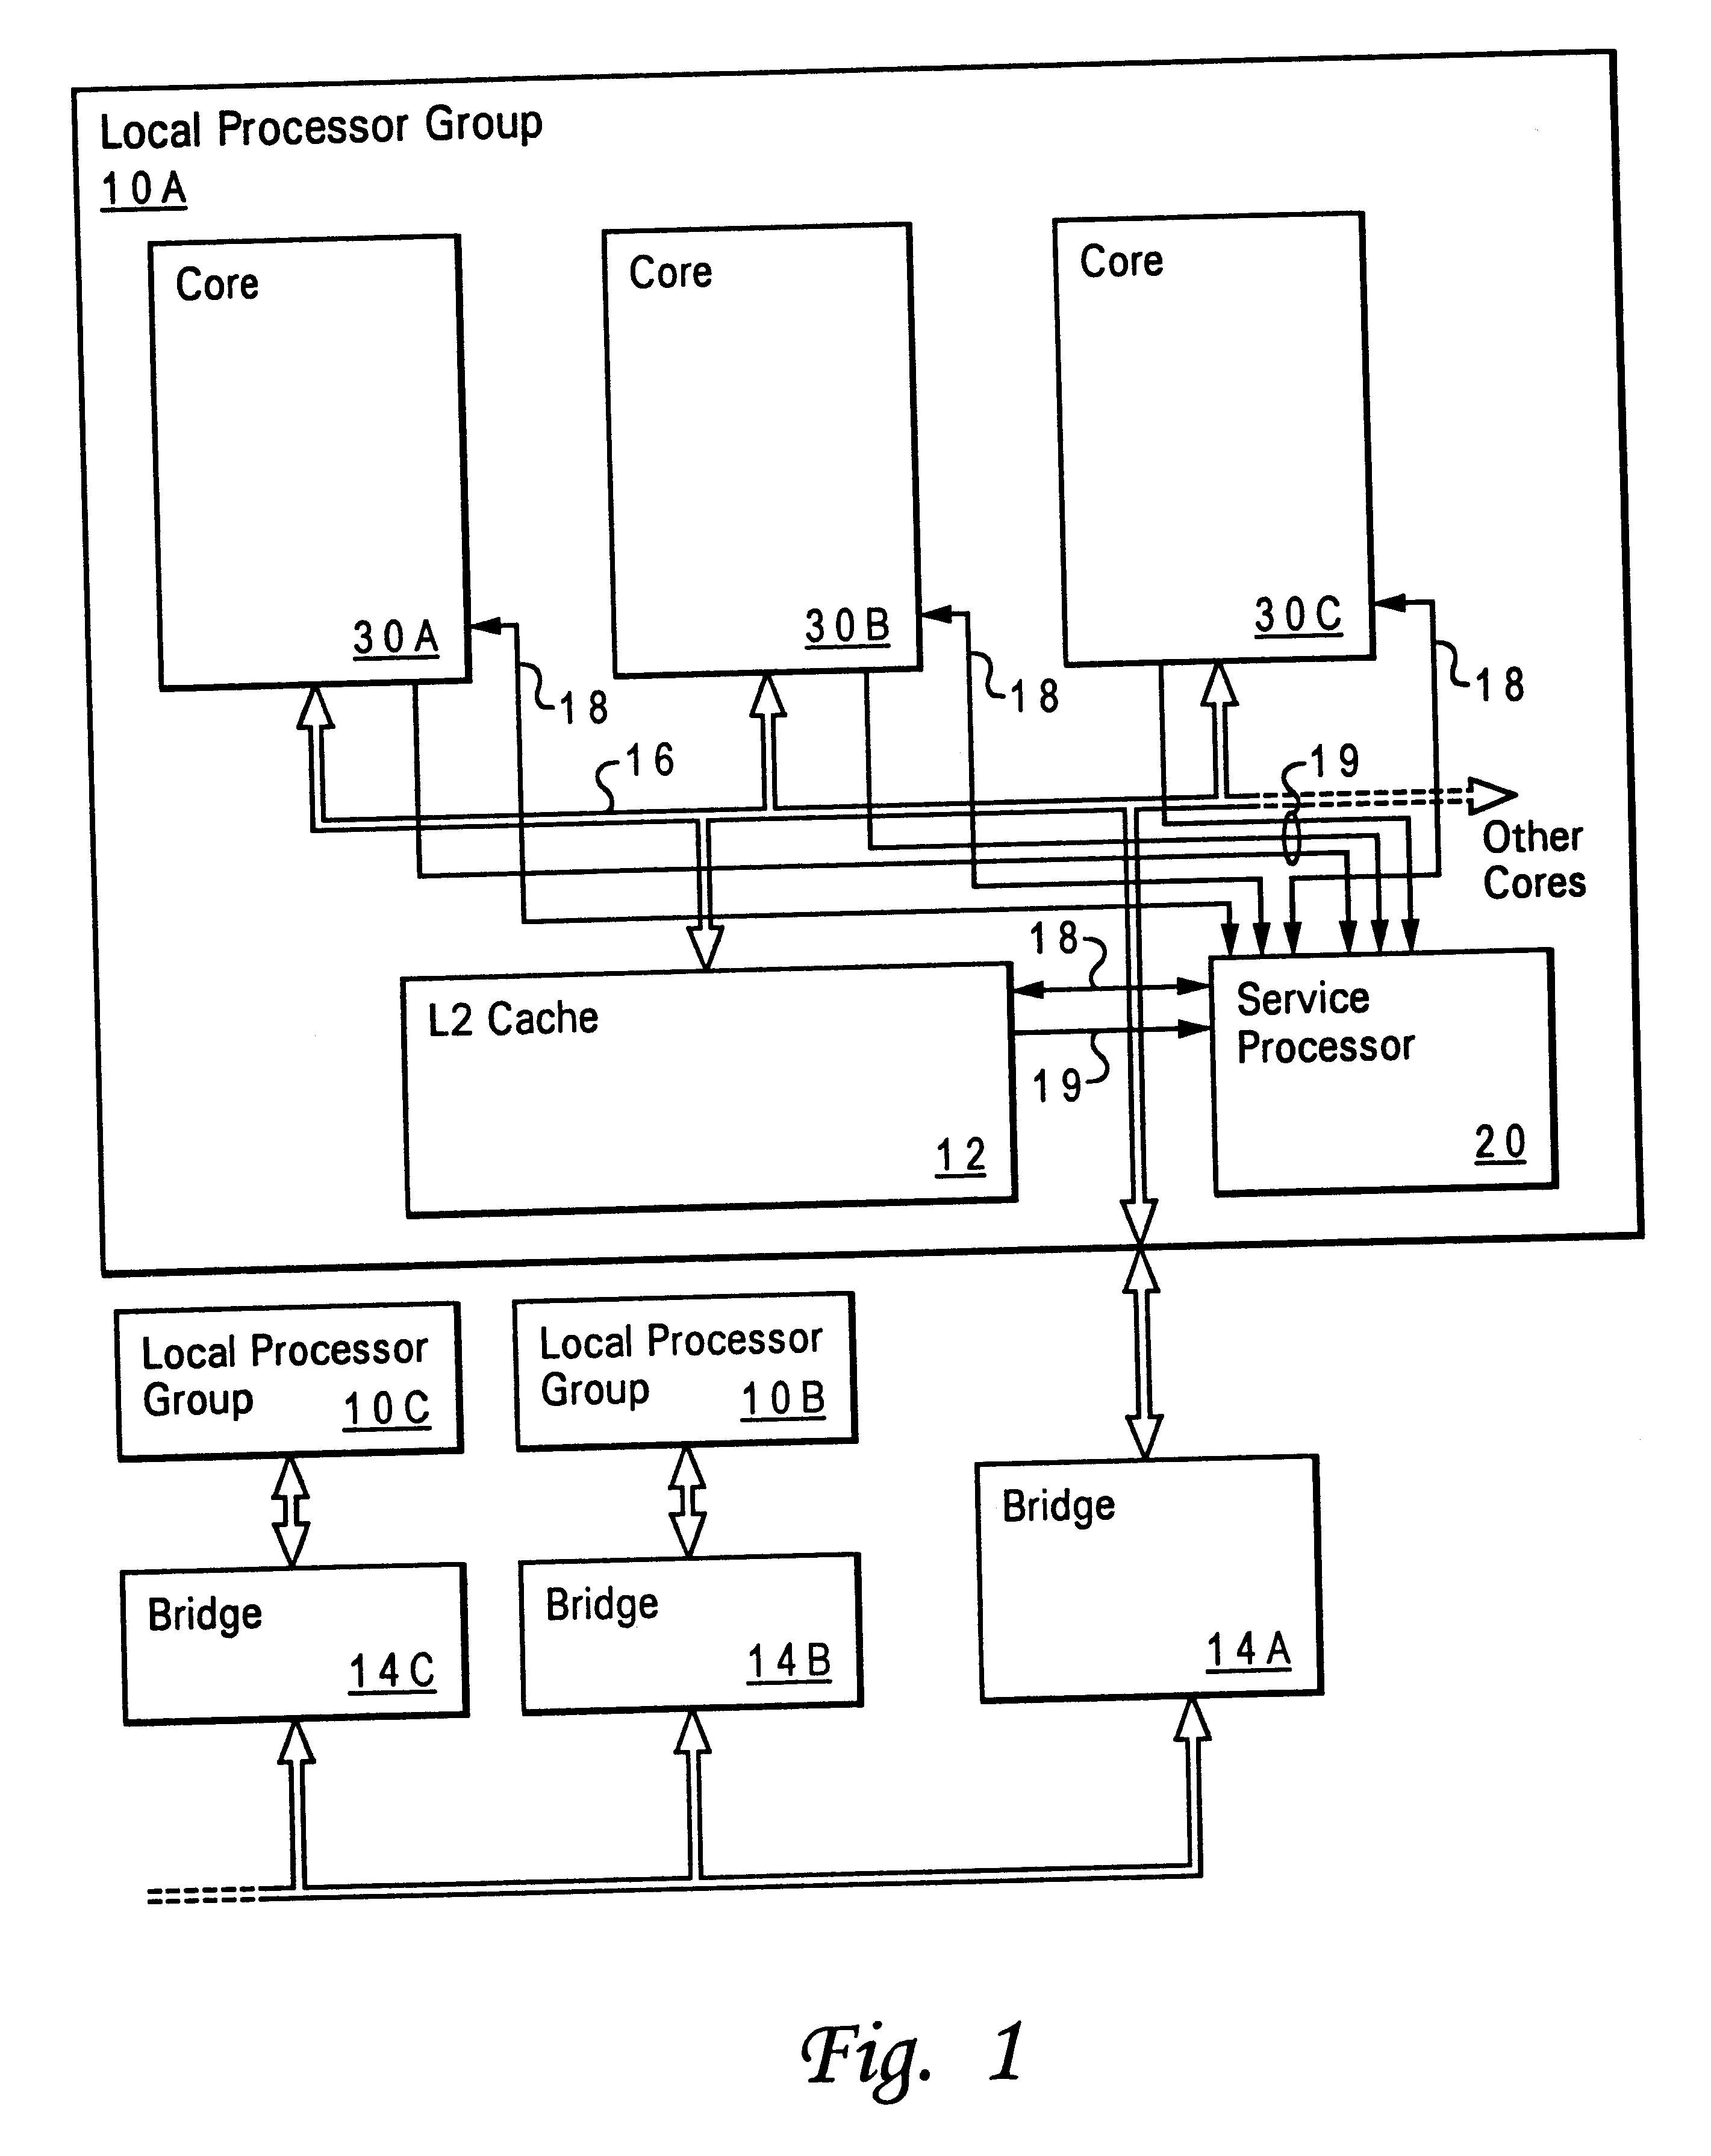 Method and apparatus for providing cooperative fault recovery between a processor and a service processor